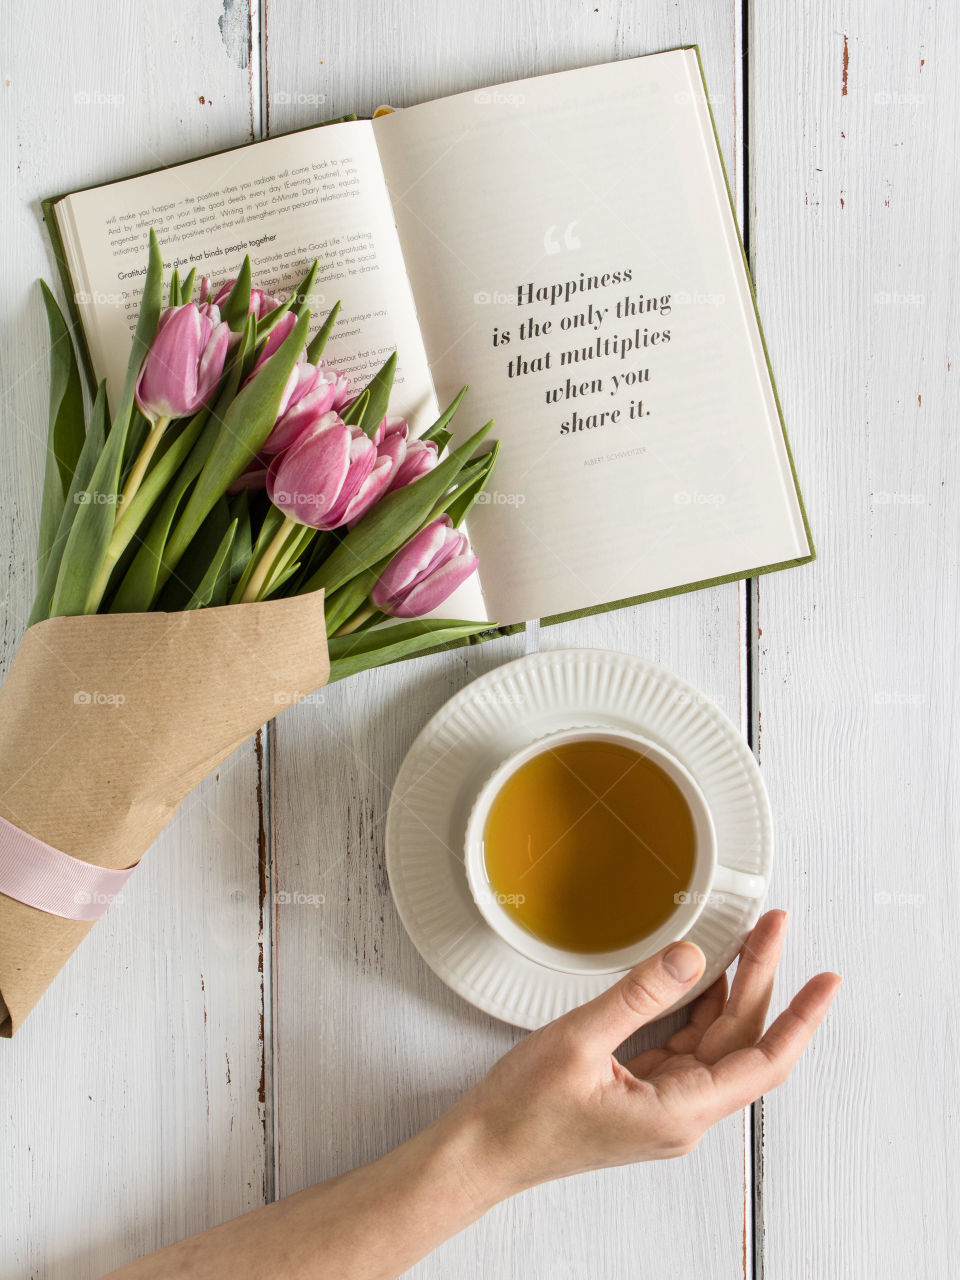 drinking tea and reading book, pink flowers, white wooden table